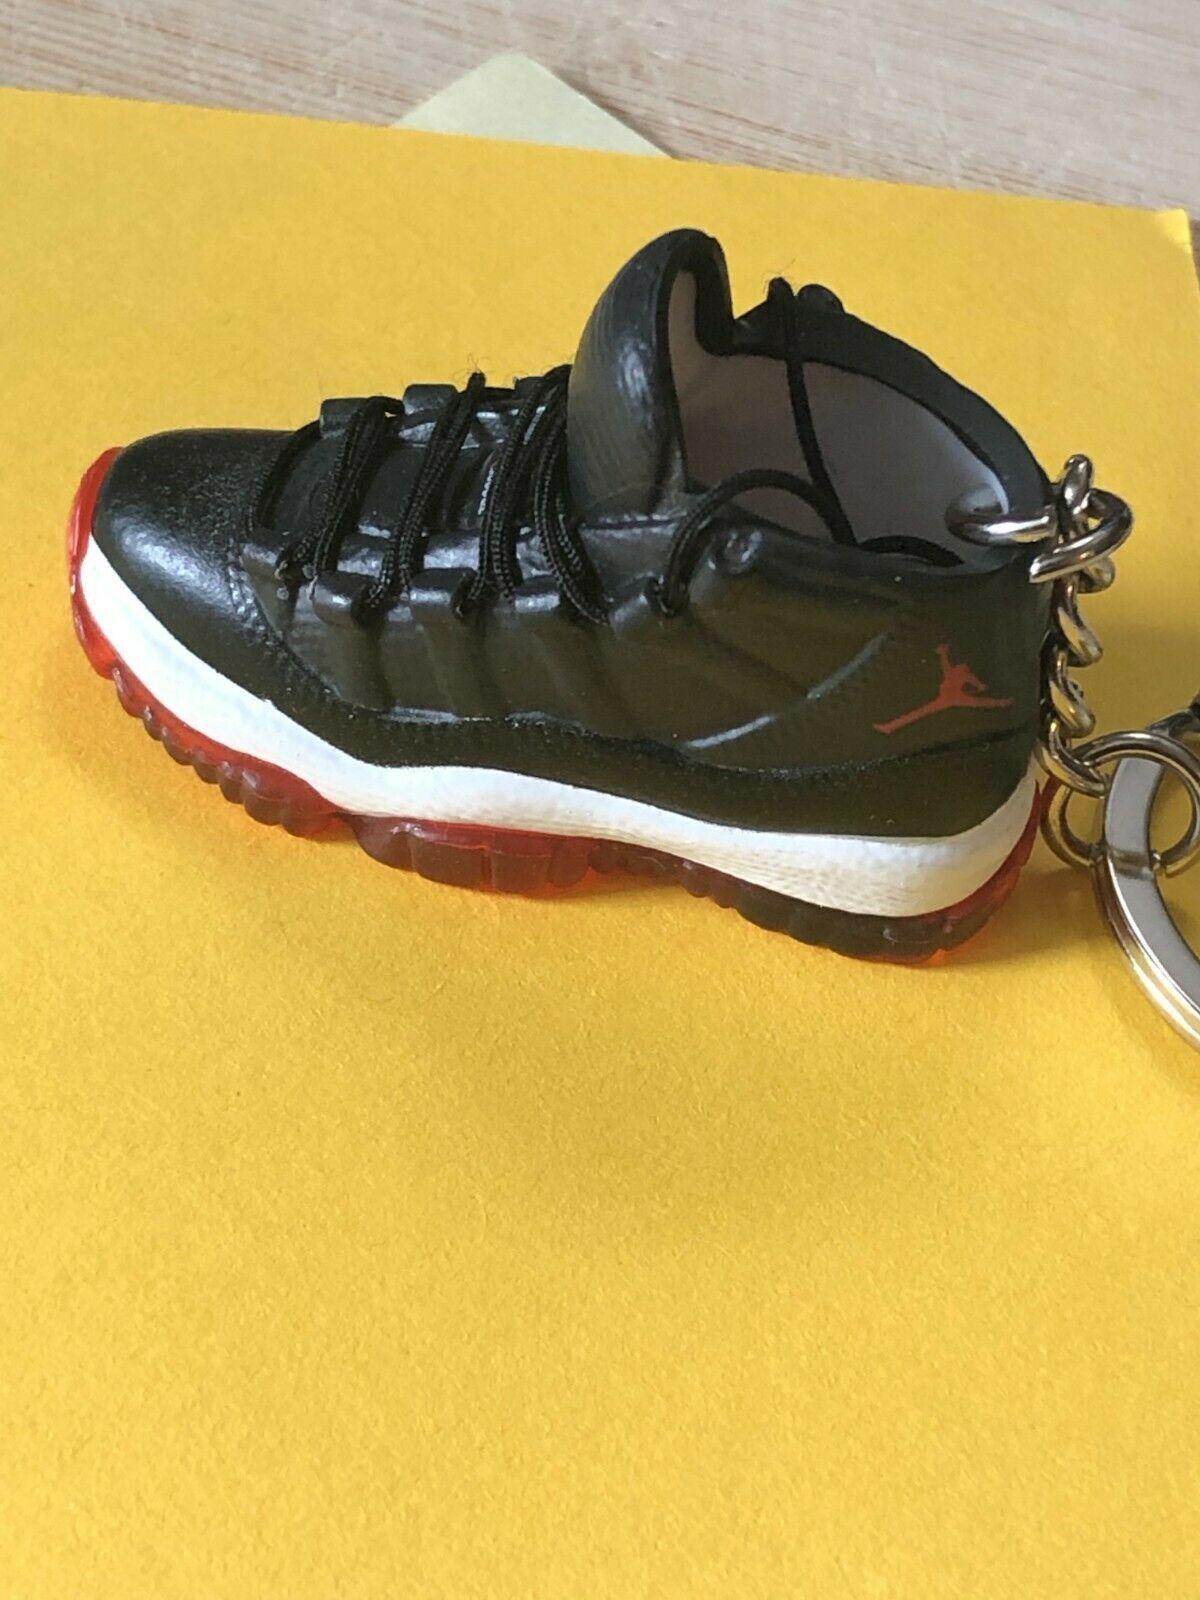 New Mini 3D AIR JORDAN sneaker shoes keychain Hand-painted. Black/White/Red